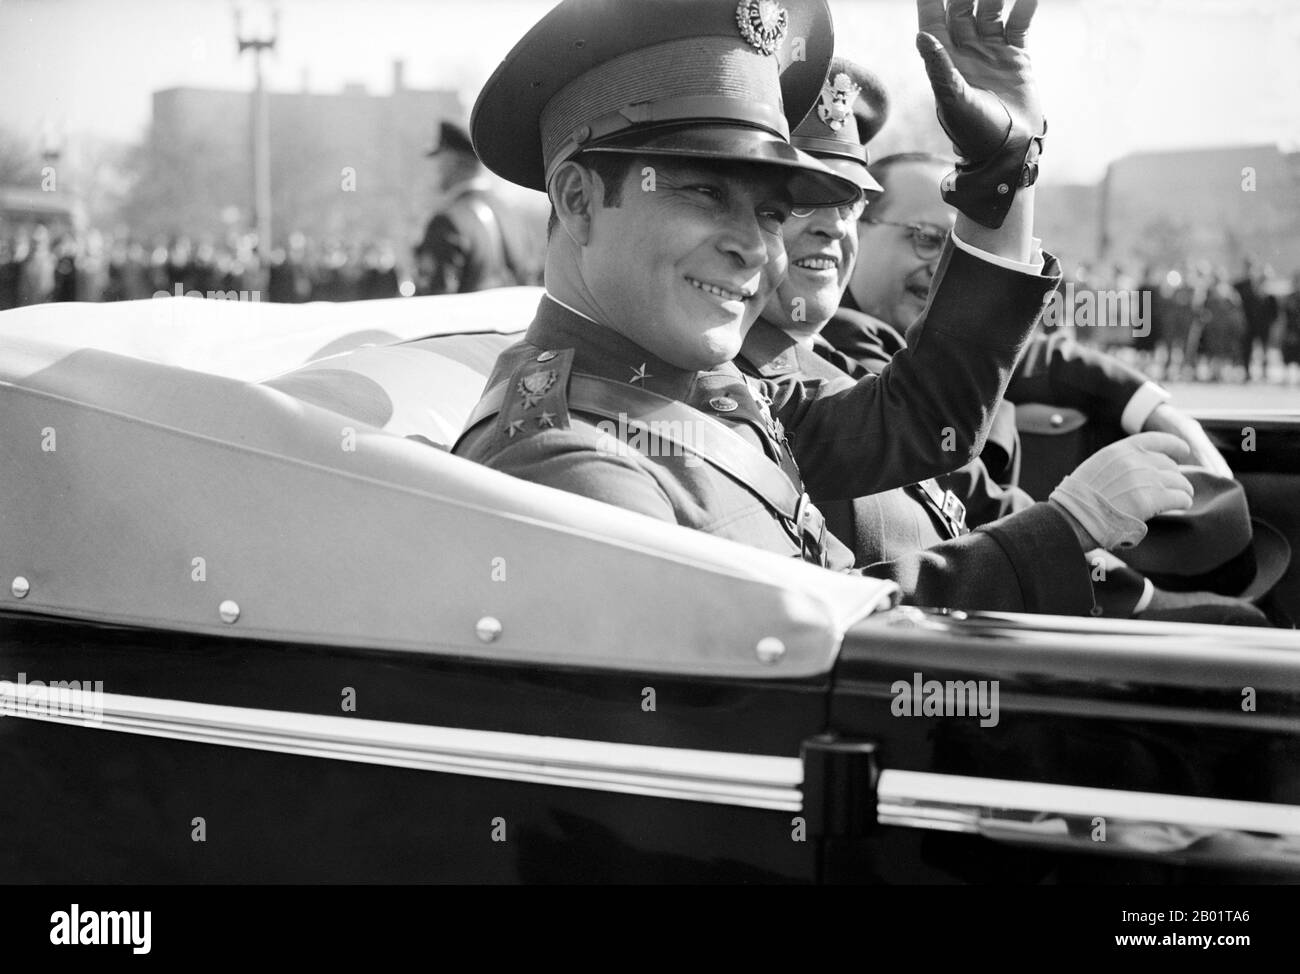 Cuba/USA: The Cuban dictator Fulgencio Batista (16 January 1901 - 6 August 1973) with US Army Chief of Staff Malin Craig in a Cadillac in Washington DC, 10 November 1938.  Fulgencio Batista y Zaldívar was a Cuban President, dictator and military leader closely aligned with and supported by the United States. He served as the leader of Cuba from 1933 to 1944 and from 1952 to 1959, before being overthrown as a result of the Cuban Revolution. Stock Photo